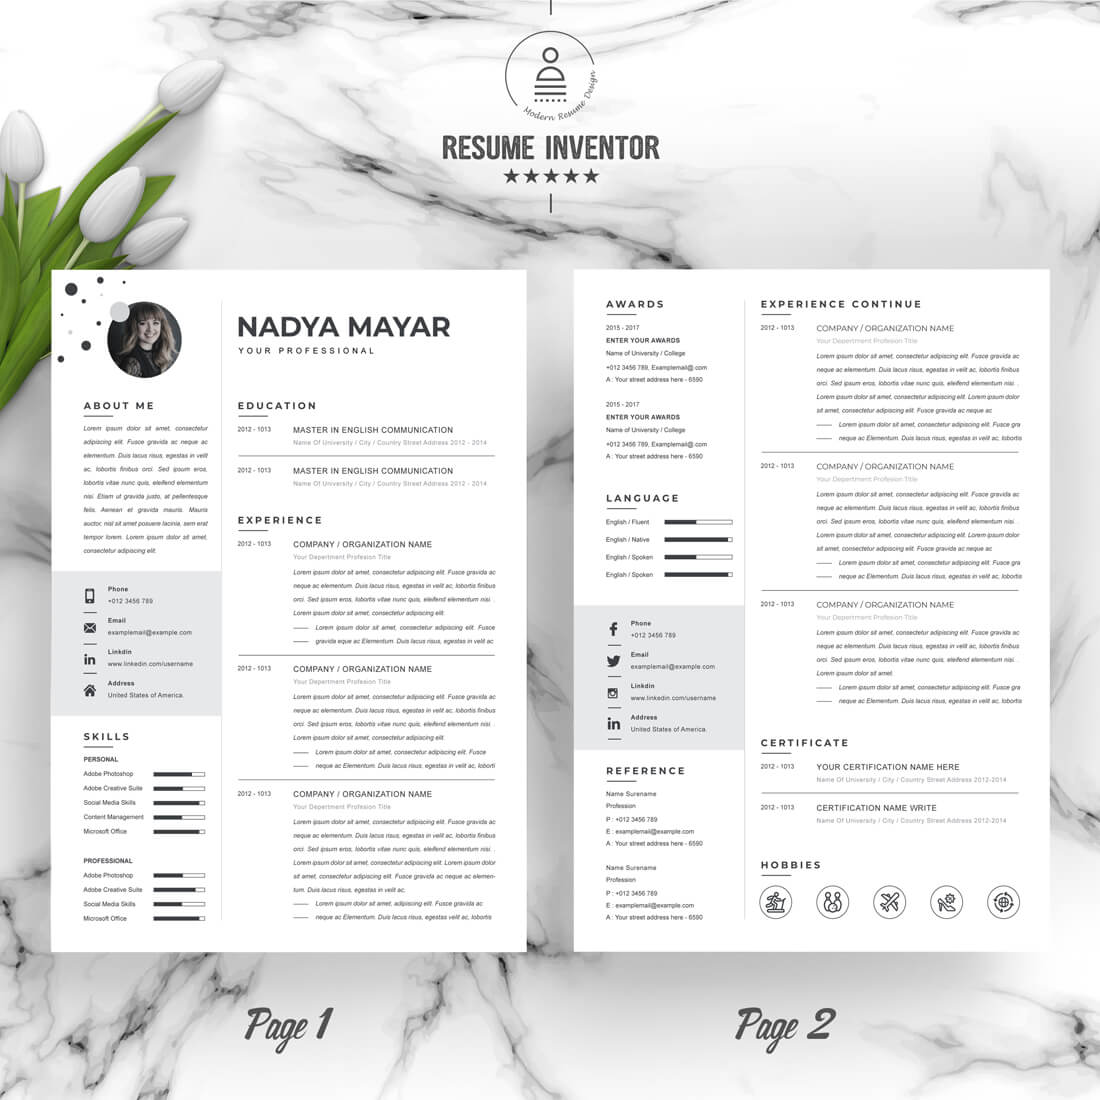 Clean and Elegant Resume Template for Creative Professionals in Design, Advertising, and Media Industries" preview image.